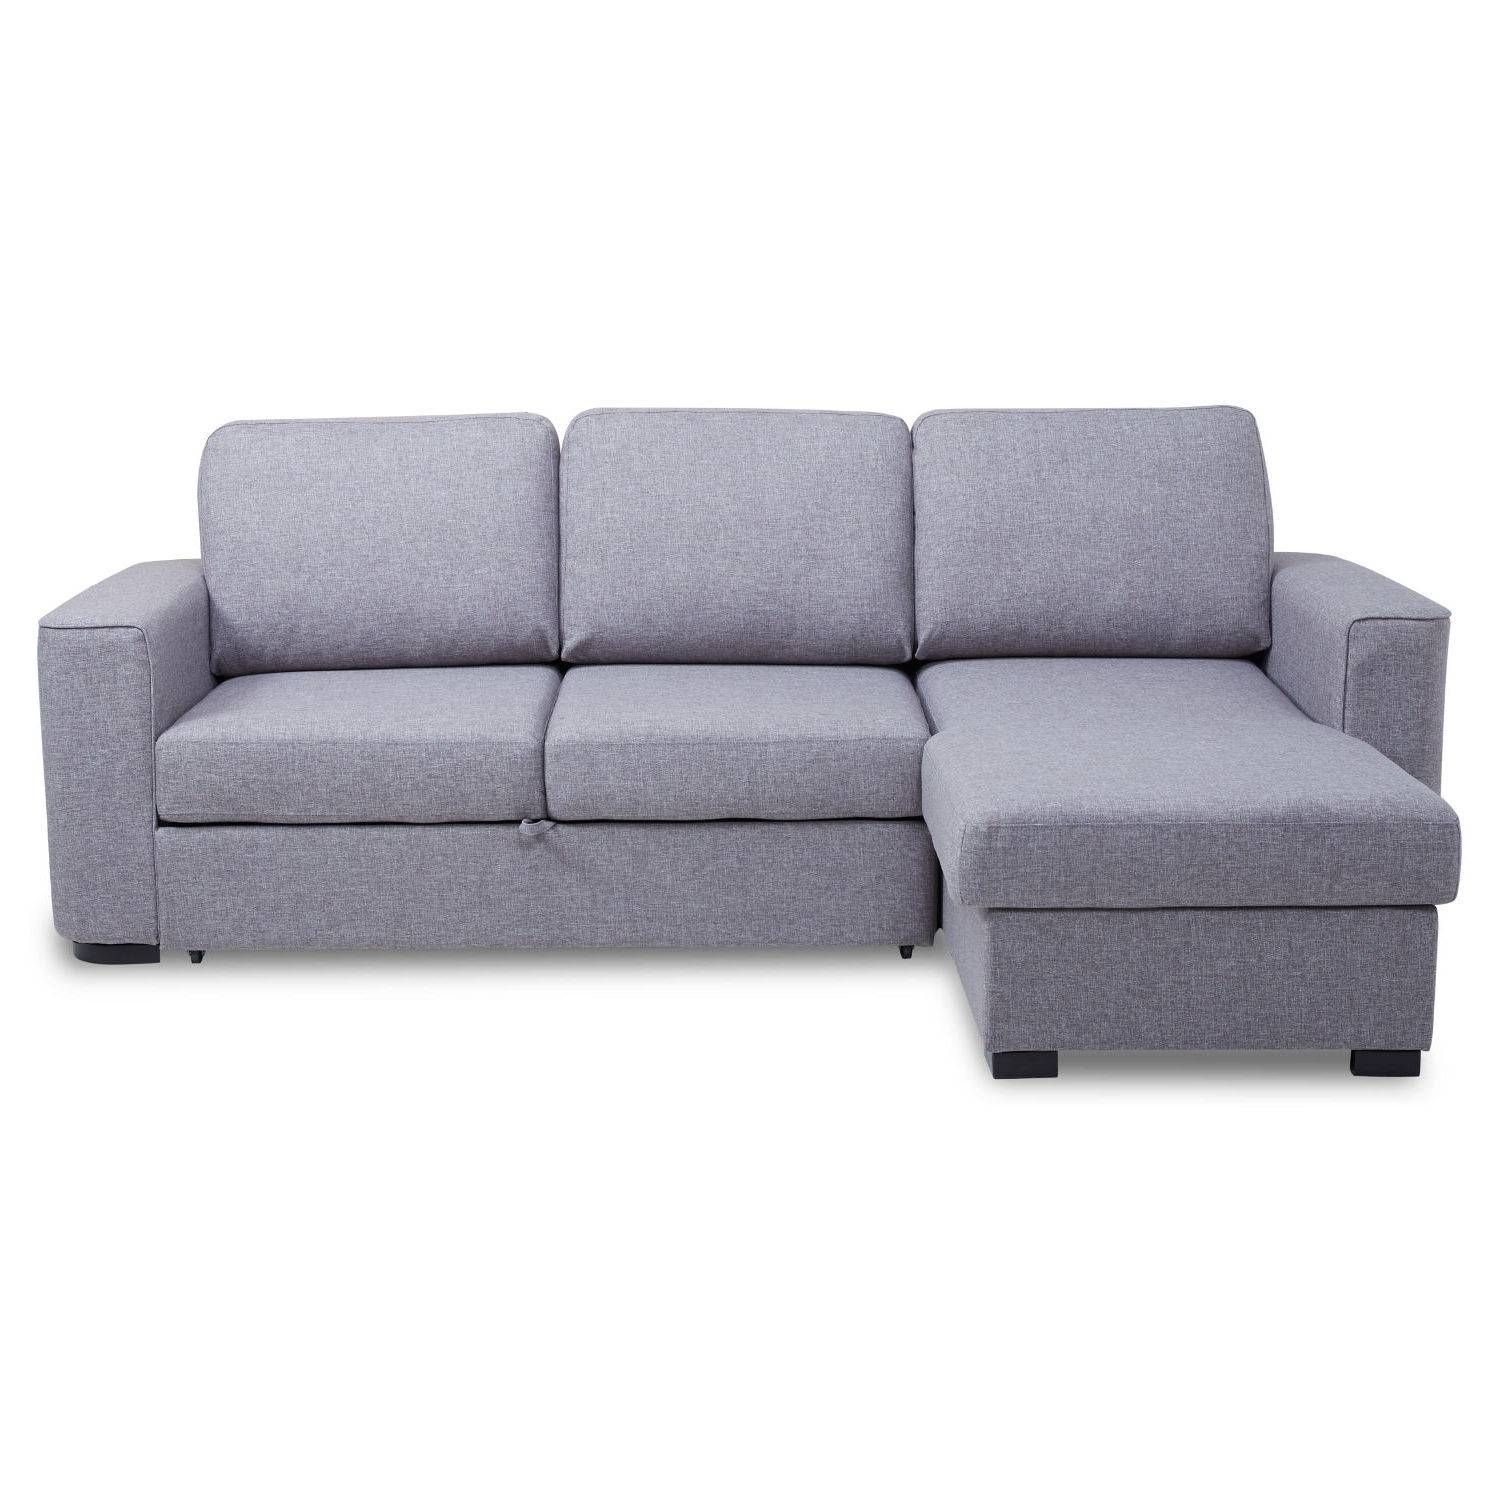 Ronny Fabric Corner Chaise Sofa Bed With Storage – Next Day Throughout Chaise Sofa Beds With Storage (View 10 of 15)